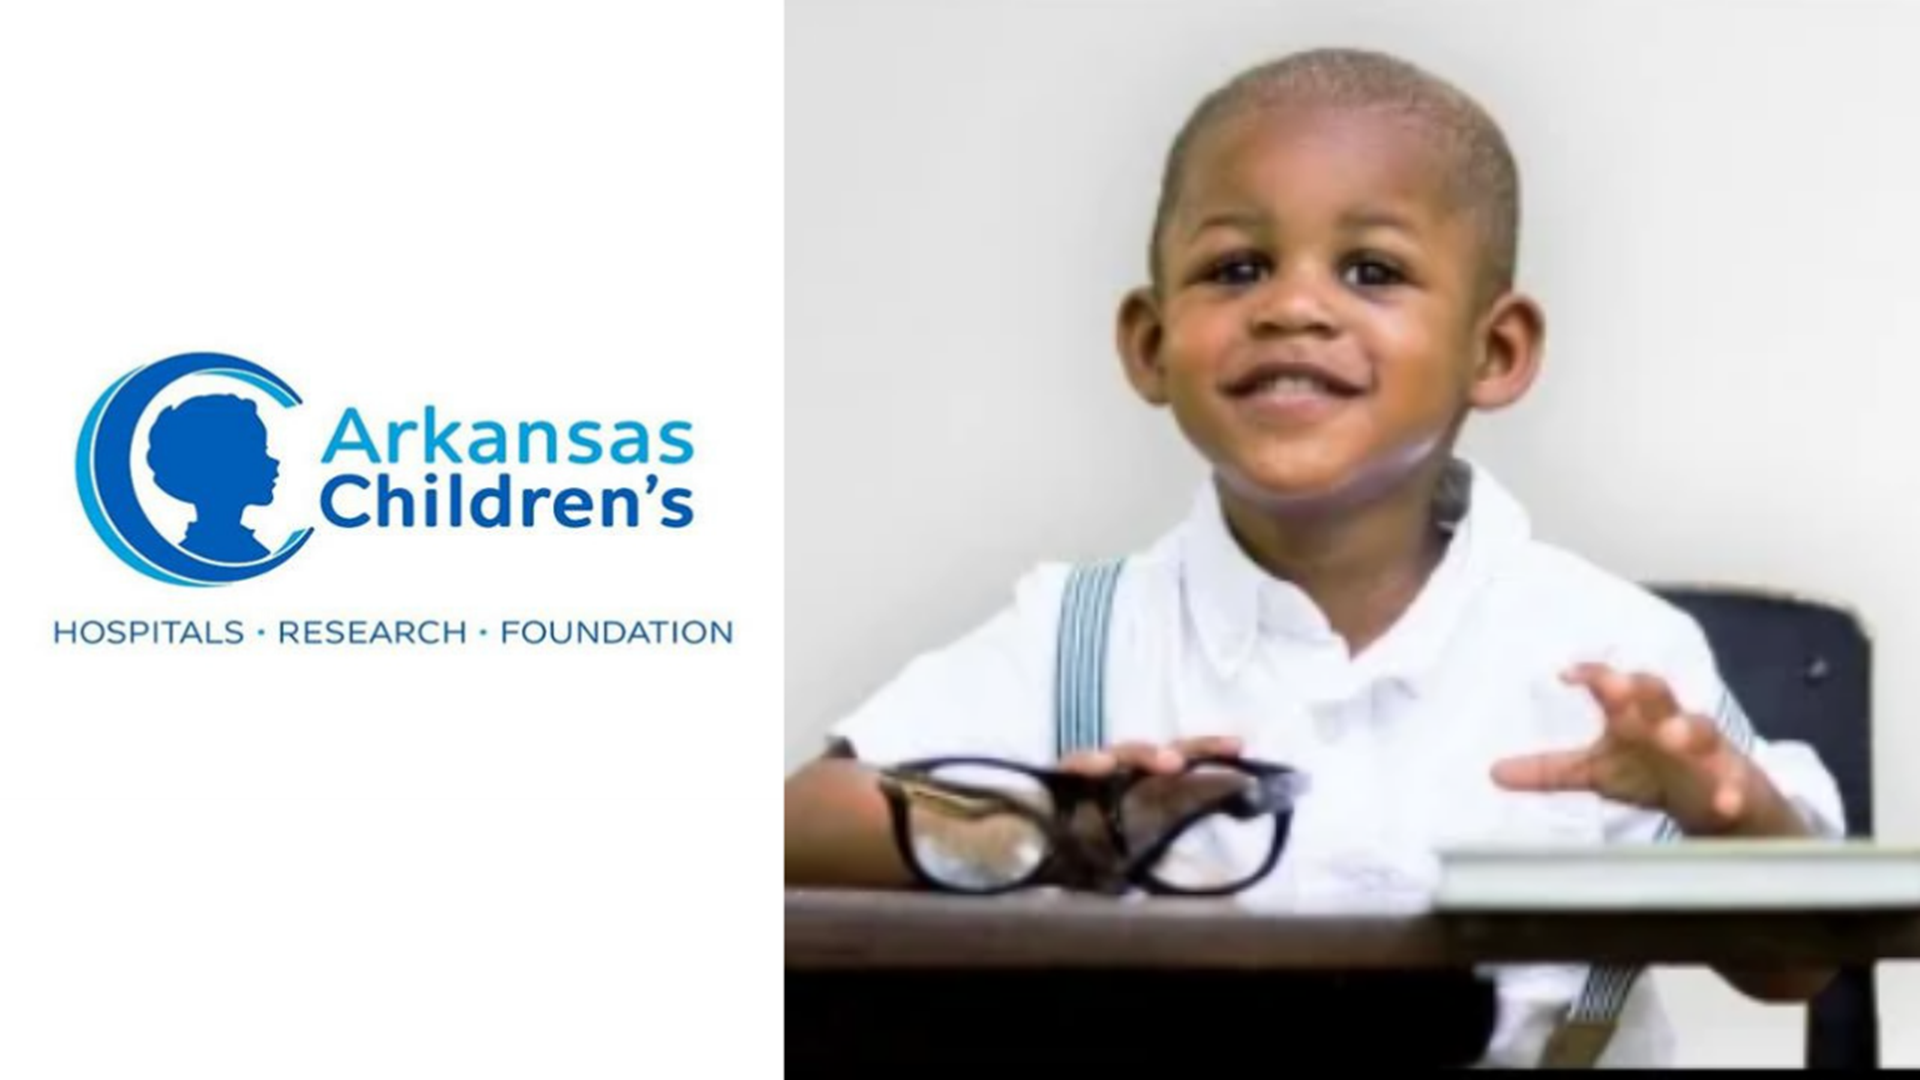 Arkansas Children’s Hospital went above and beyond for Zyler Henry when they performed a surgery that no one in the country could do at the time.